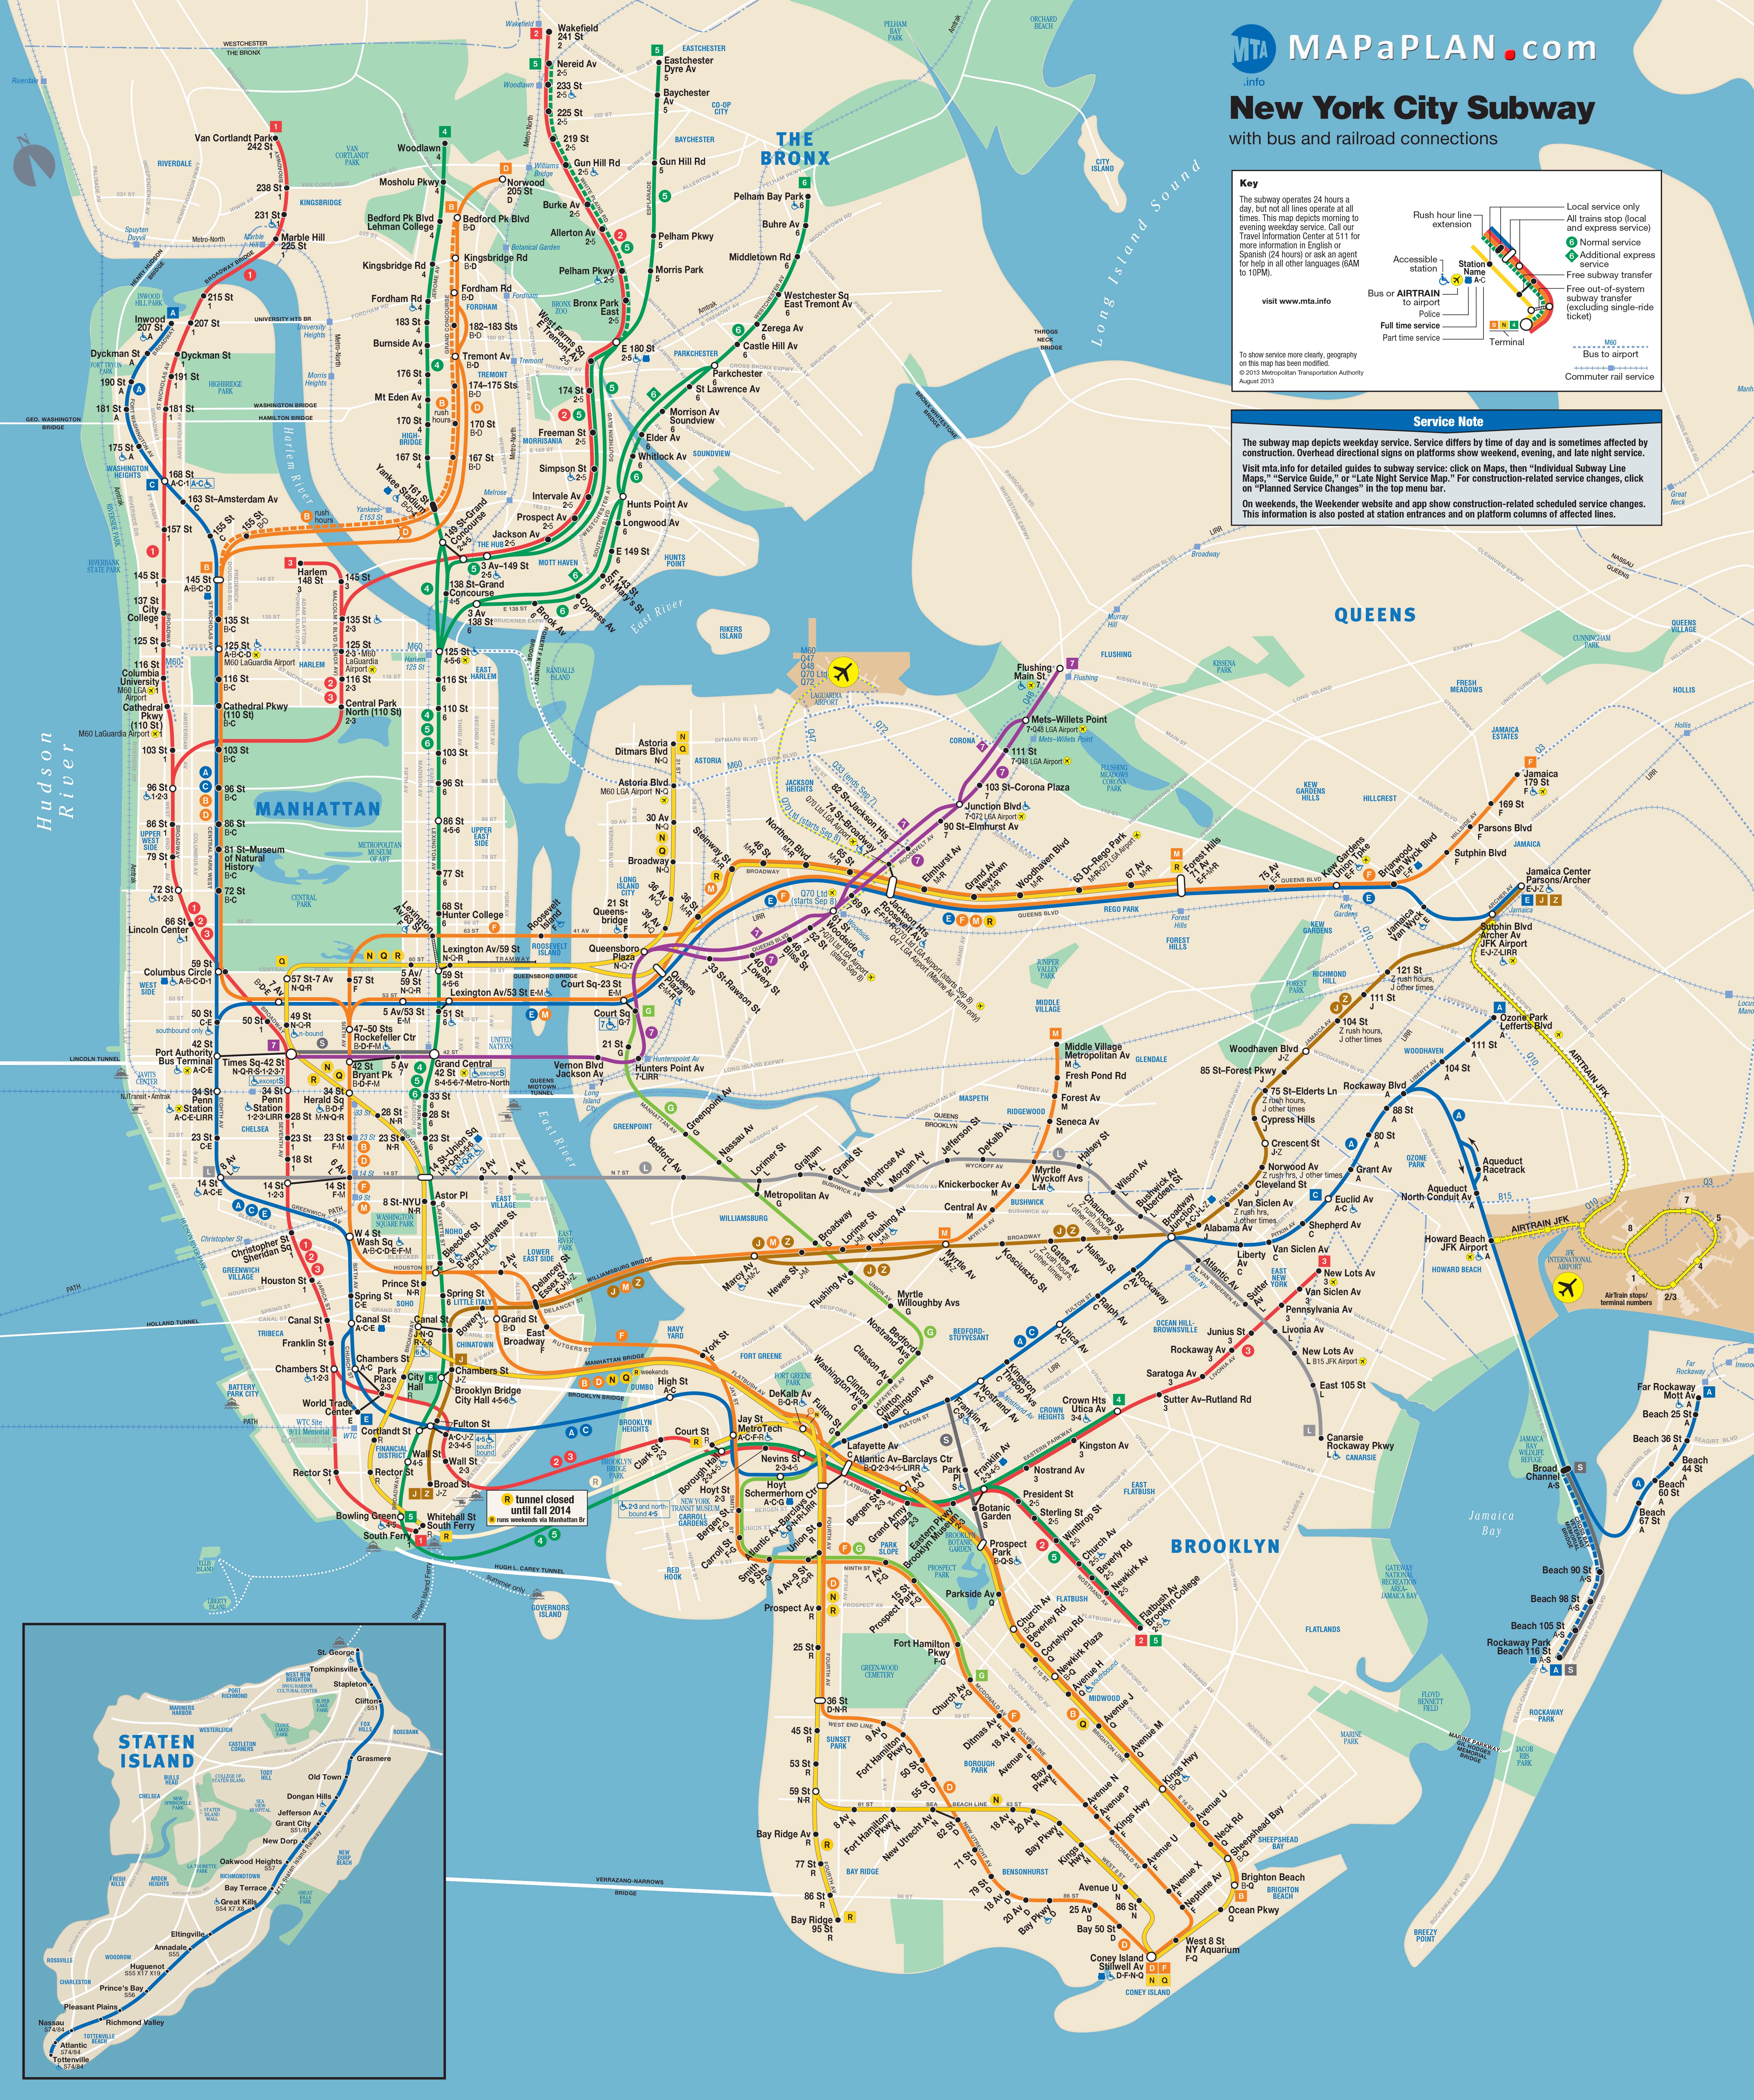 New York City Subway Metro Map With Bus And Railroad Connections